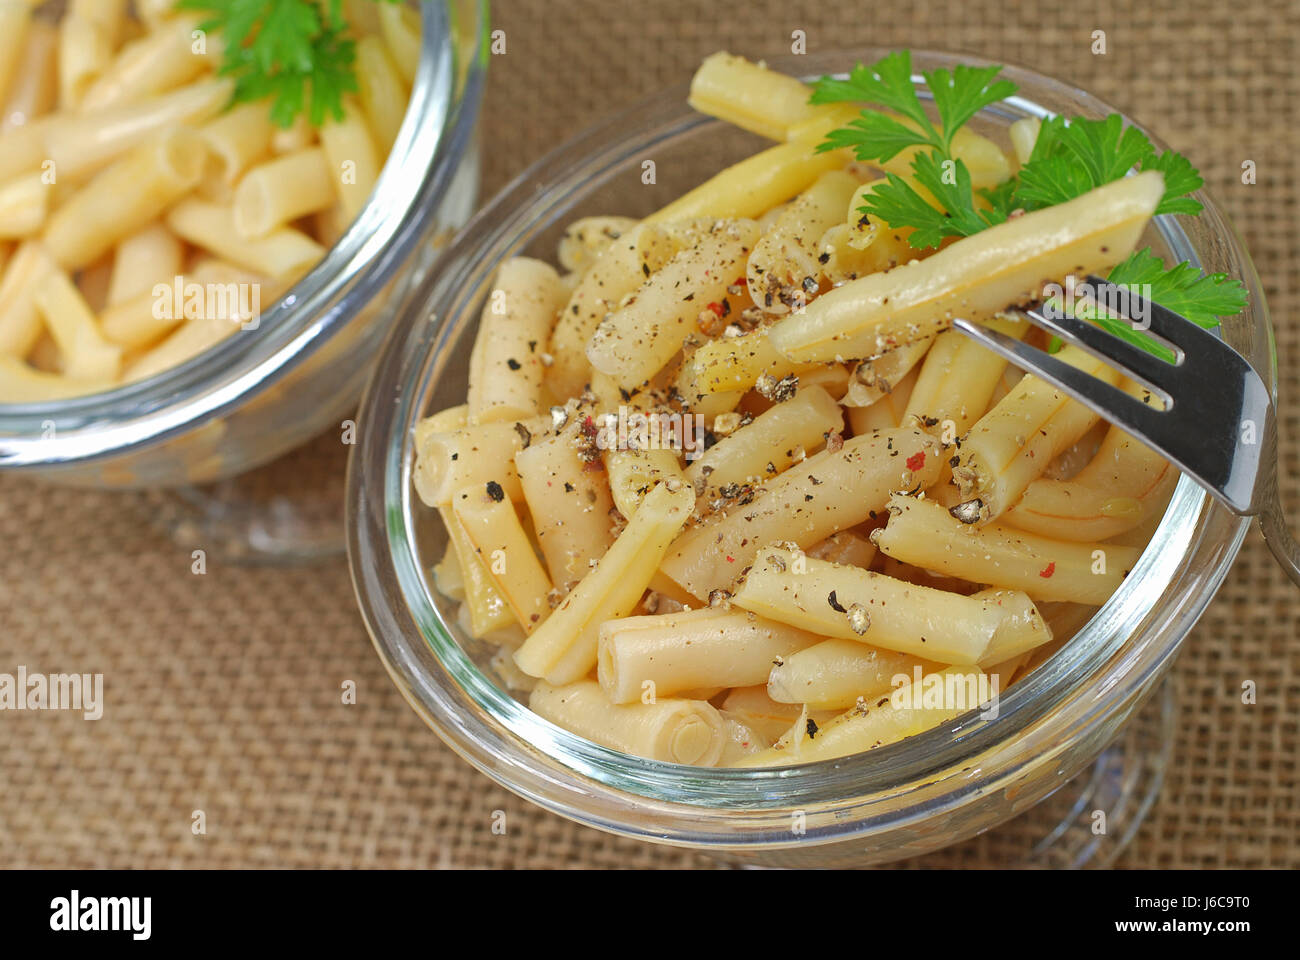 beans yellow soft beans boiled enclosure salad-bowl cooked yellow salad healthy Stock Photo